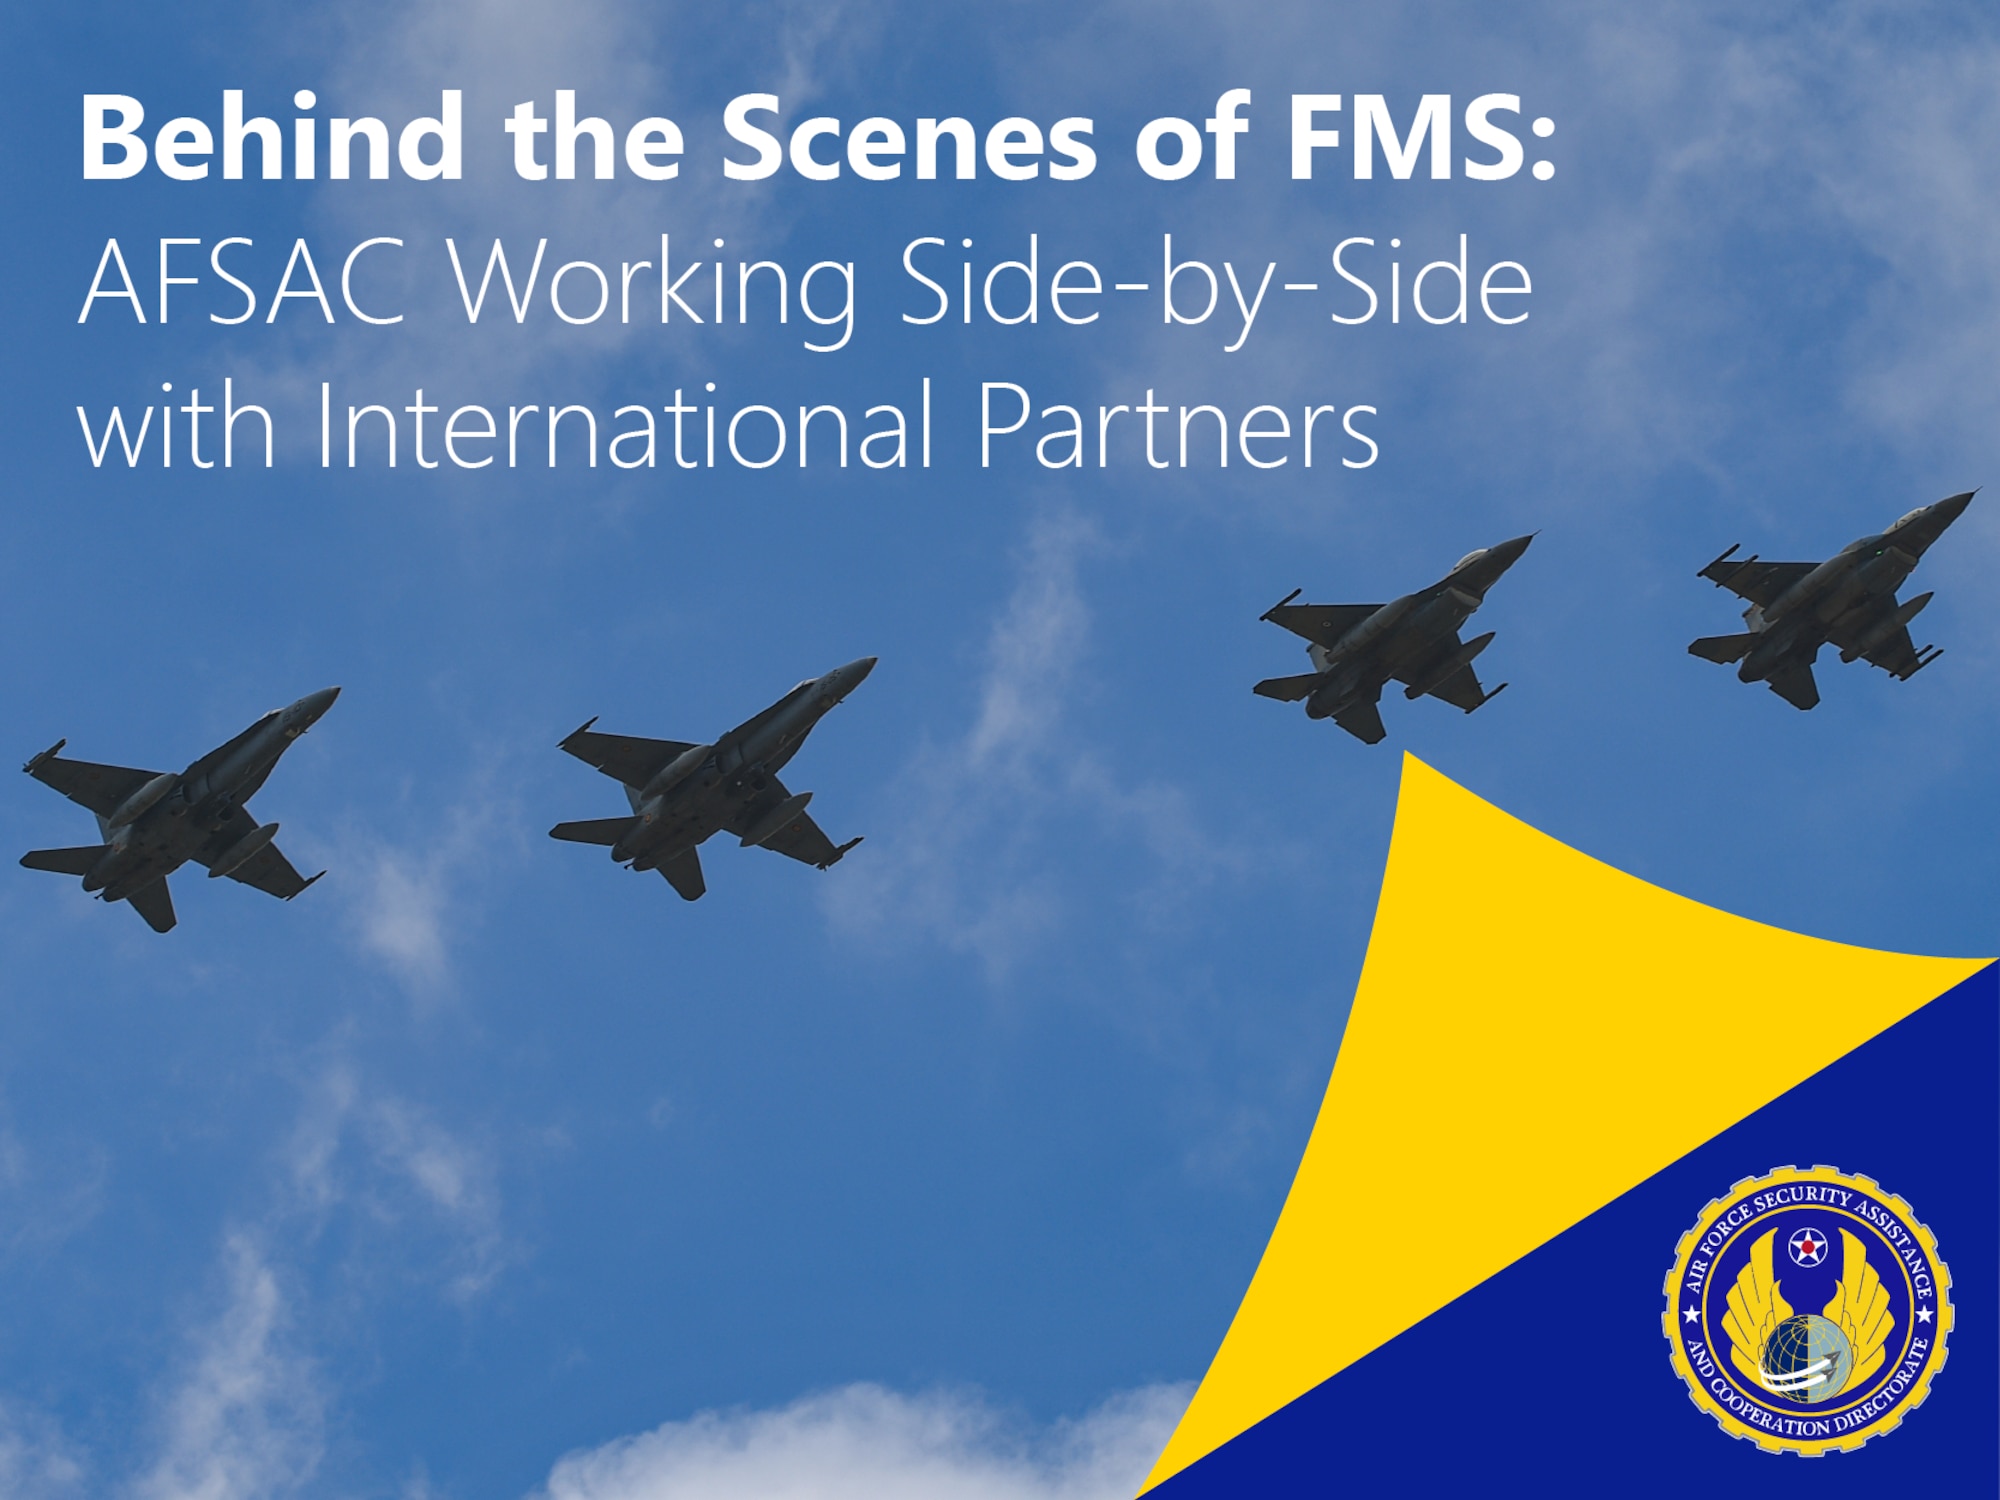 AFSAC Behind the Scenes Graphic (U.S. Air Force graphic by Jonathan Tharp, AFSAC).